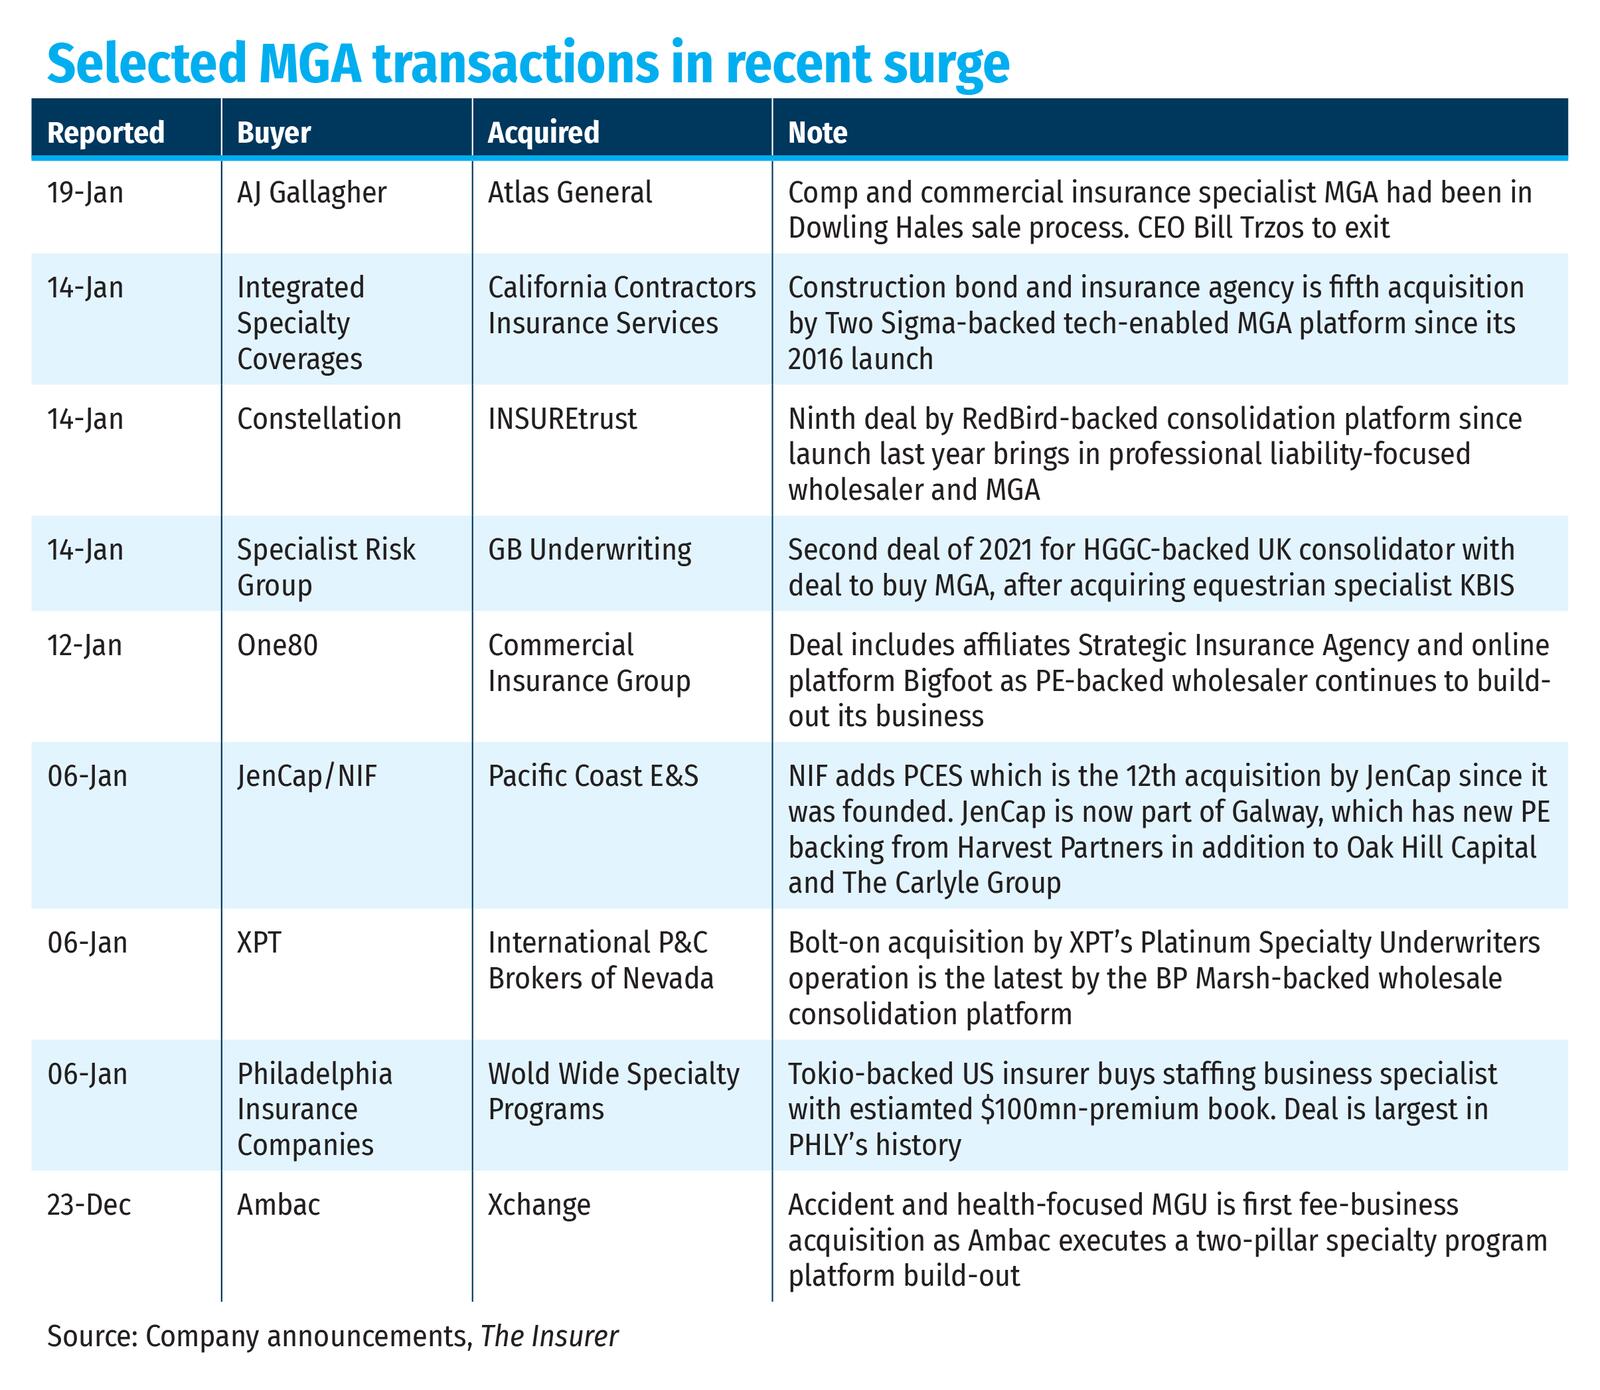 Selected MGA transactions in recent surge